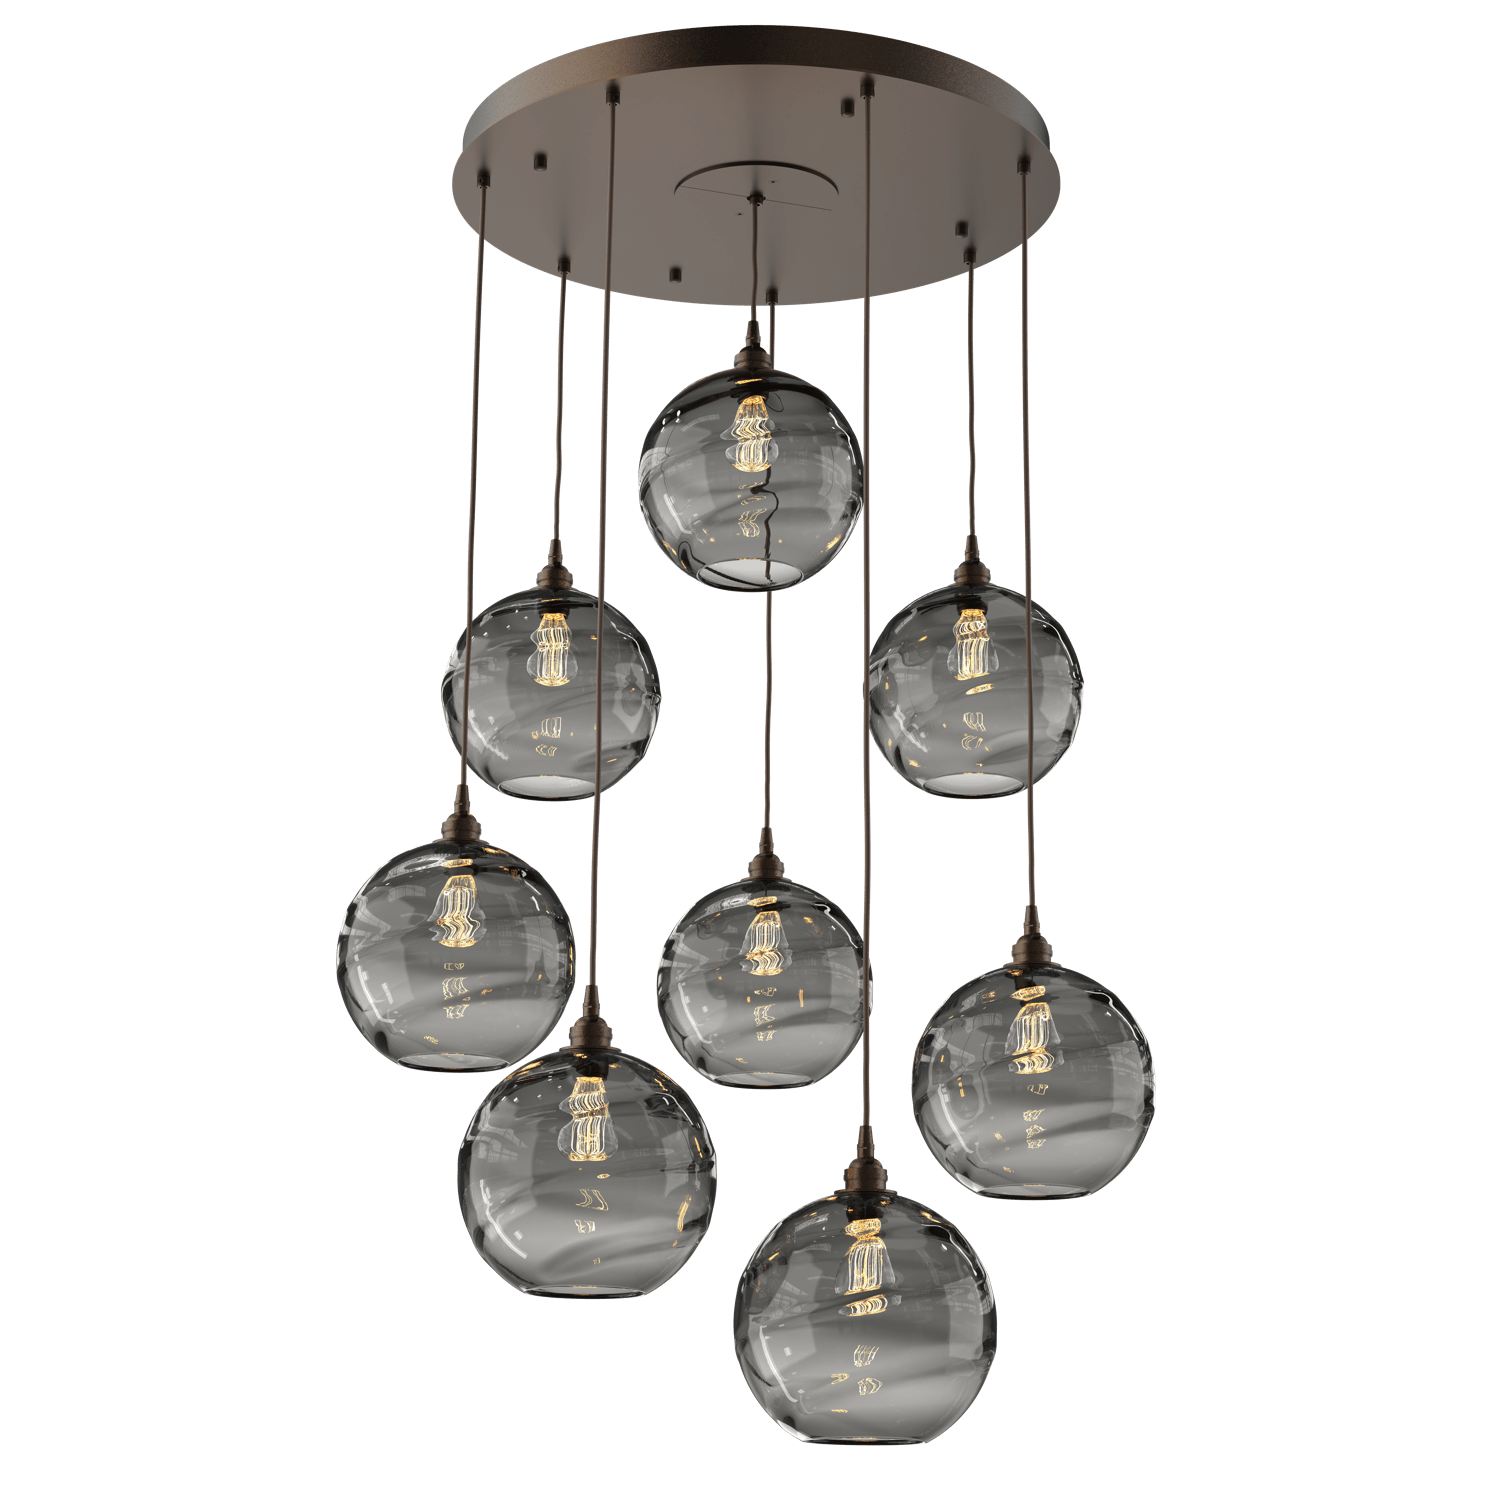 CHB0047-08-FB-OS-Hammerton-Studio-Optic-Blown-Glass-Terra-8-light-round-pendant-chandelier-with-flat-bronze-finish-and-optic-smoke-blown-glass-shades-and-incandescent-lamping